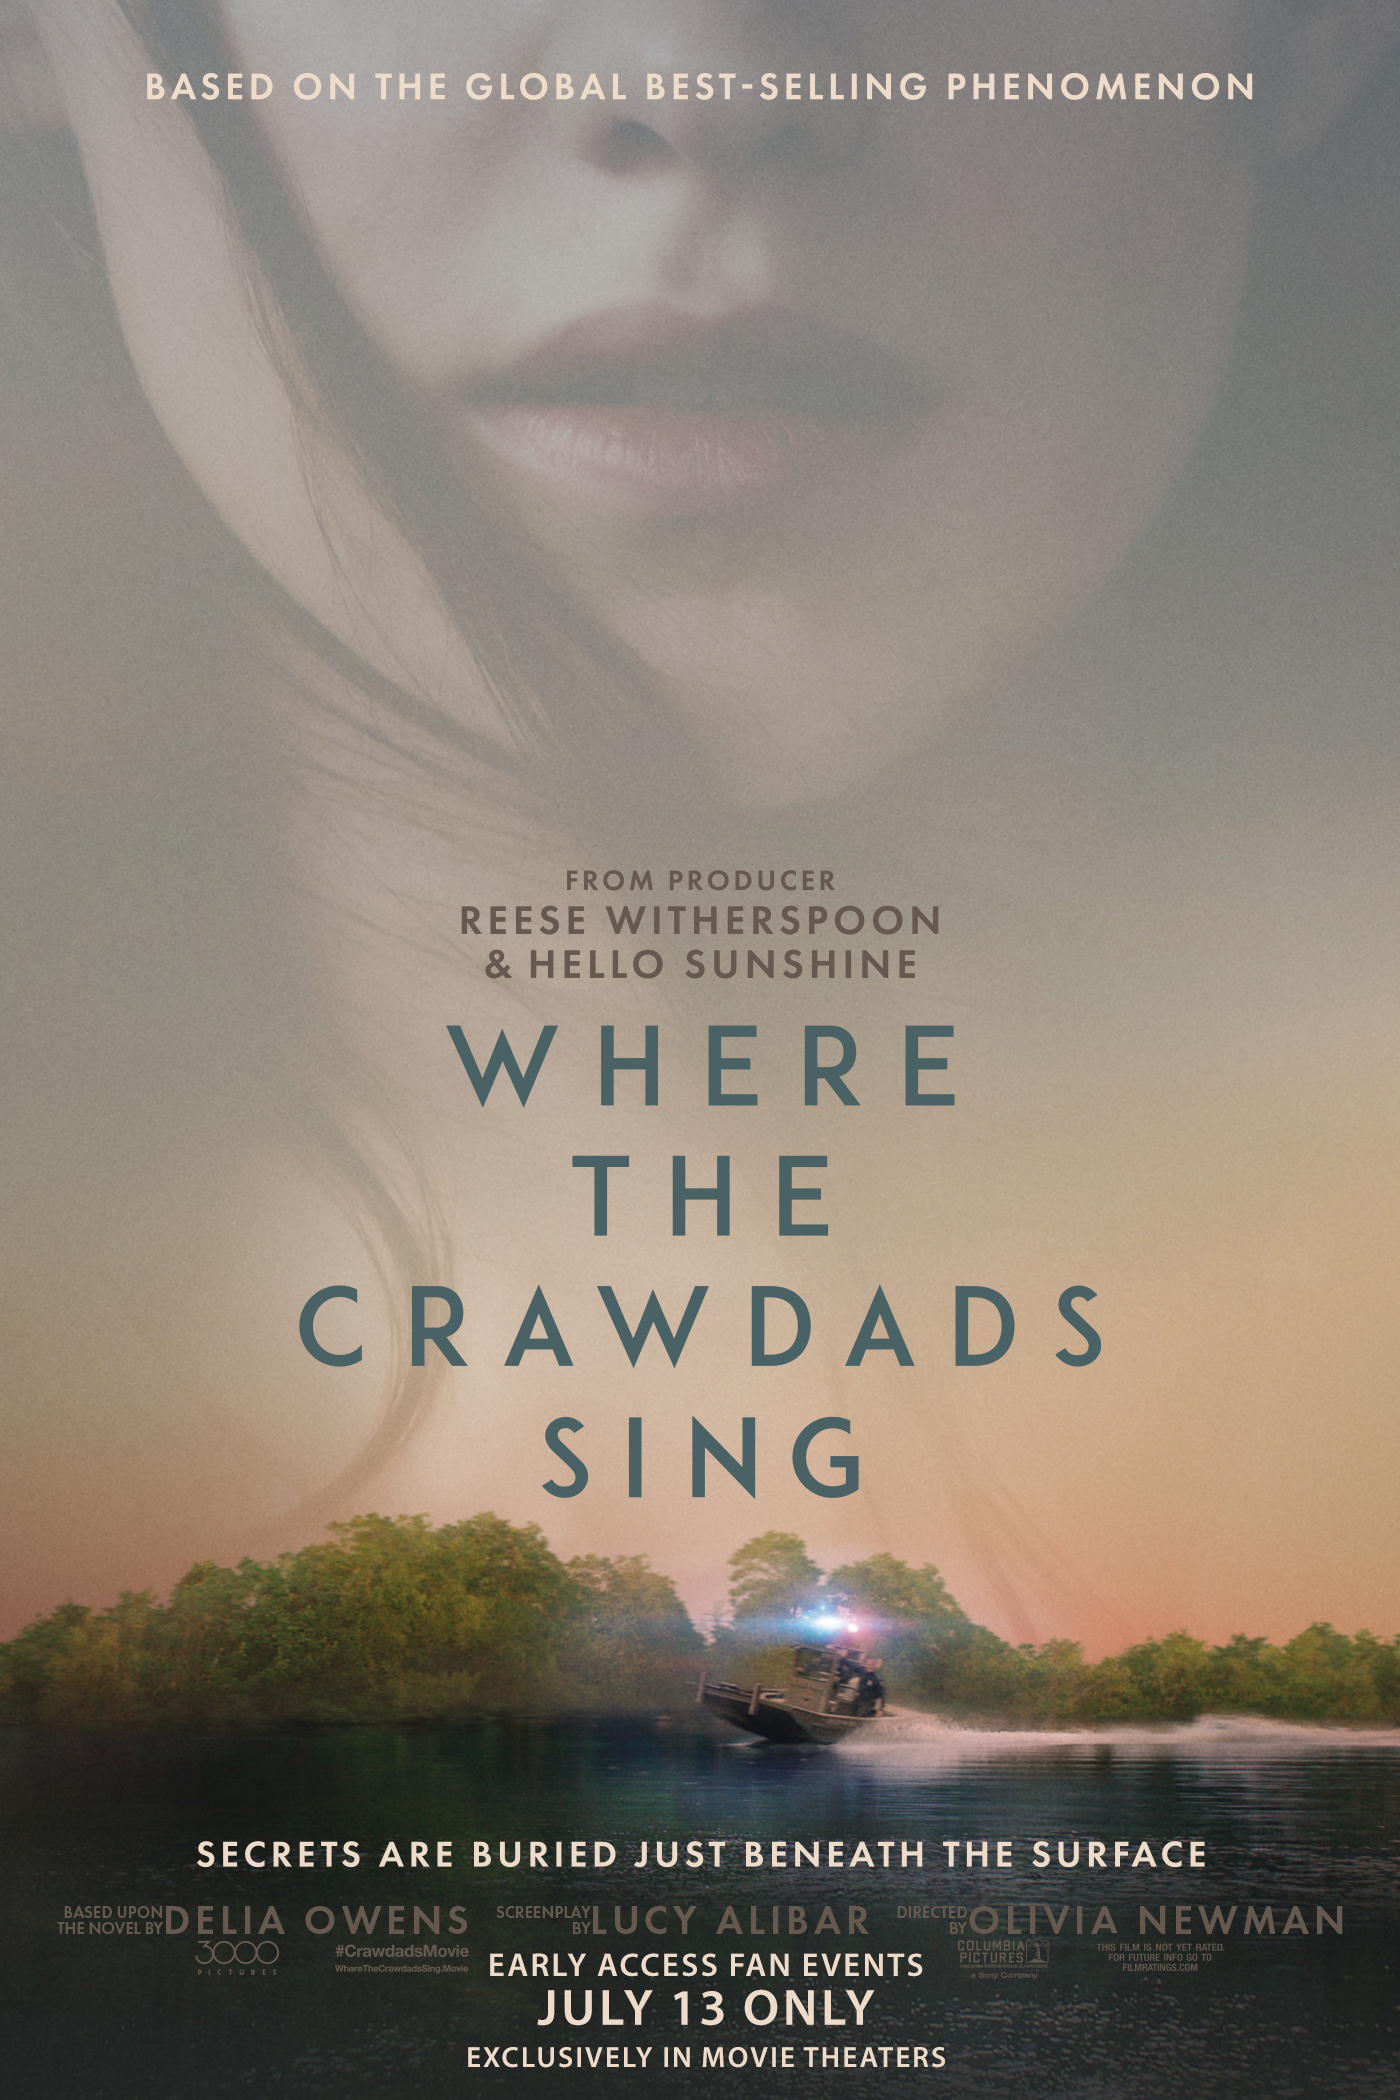 Where The Crawdads Sing Early Access Event at an AMC Theatre near you